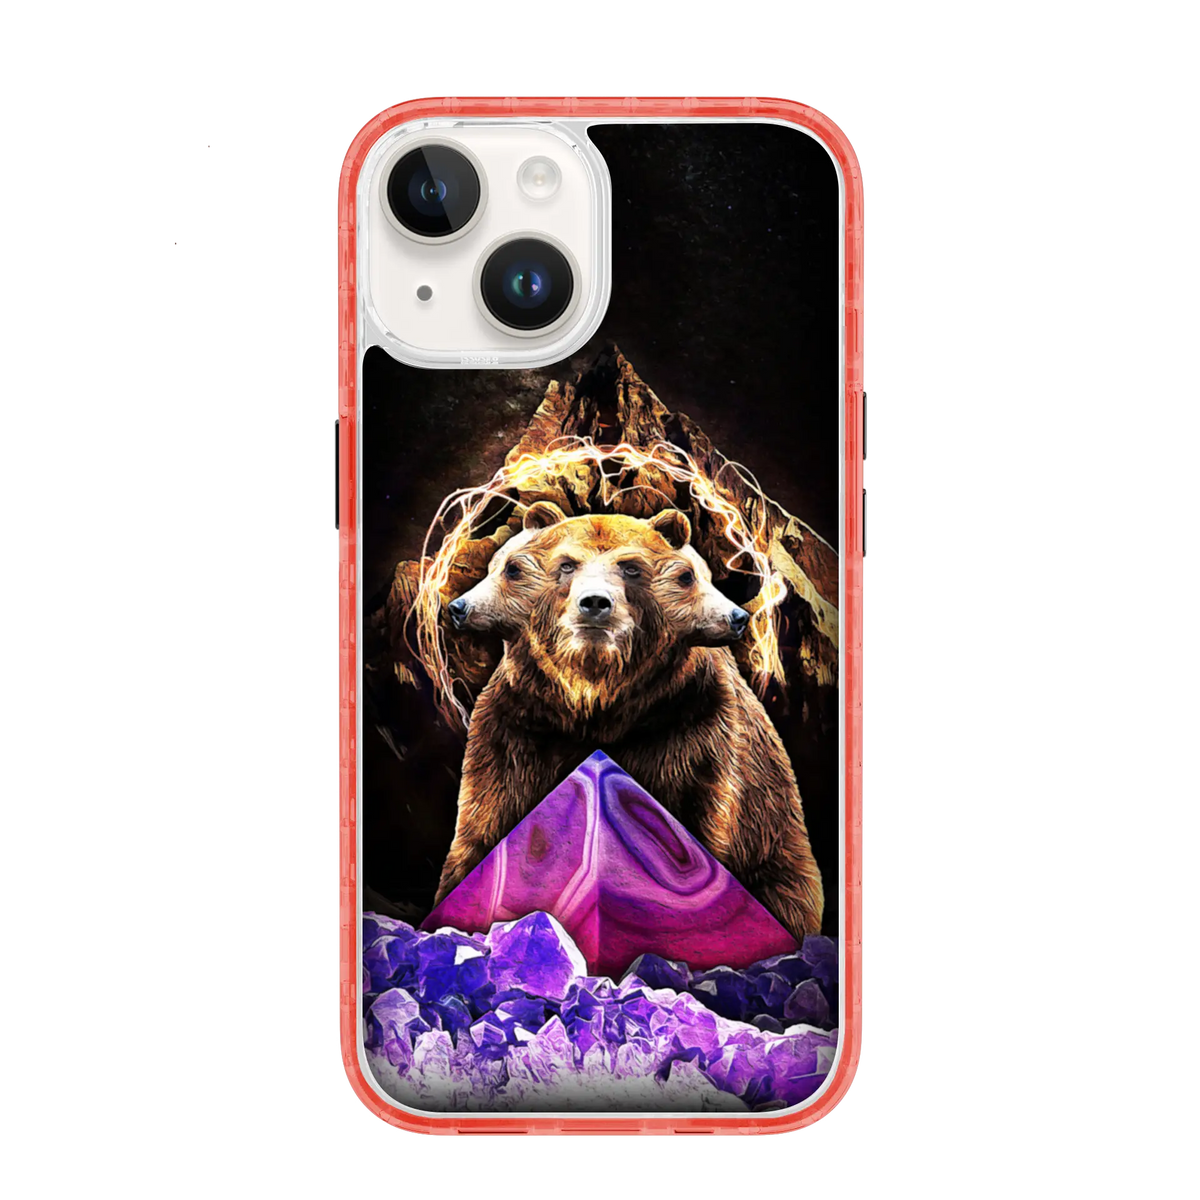 AppleiPhone14PlusTurboRed Grizzly Widsom | Wizards & Wyrms Series | Custom MagSafe Case Design for Apple iPhone 14 Series cellhelmet cellhelmet